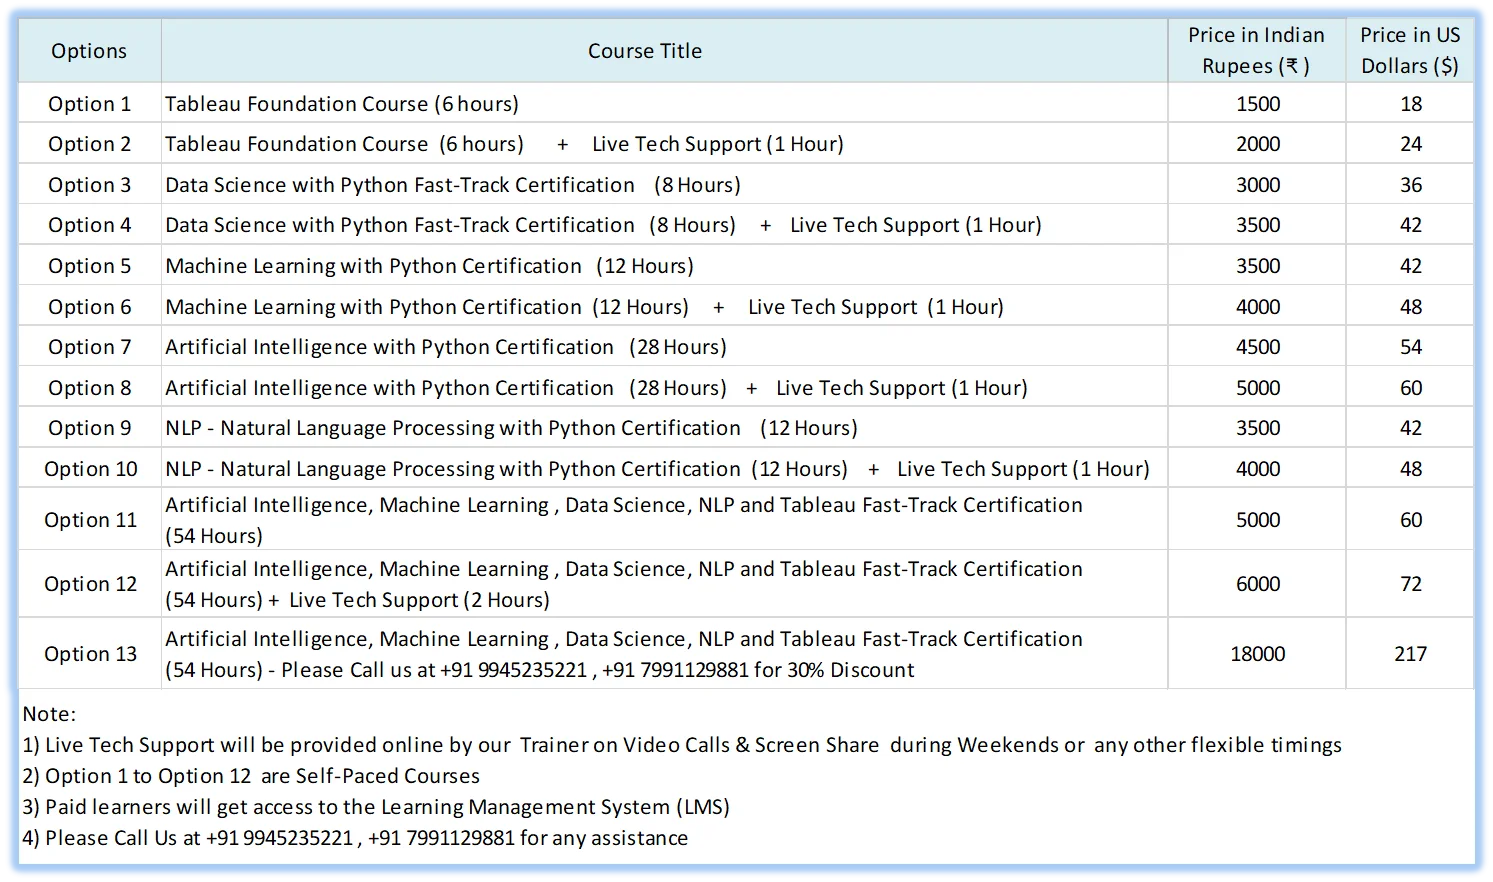 Different options for AI, ML, DS, Tableau Training Courses